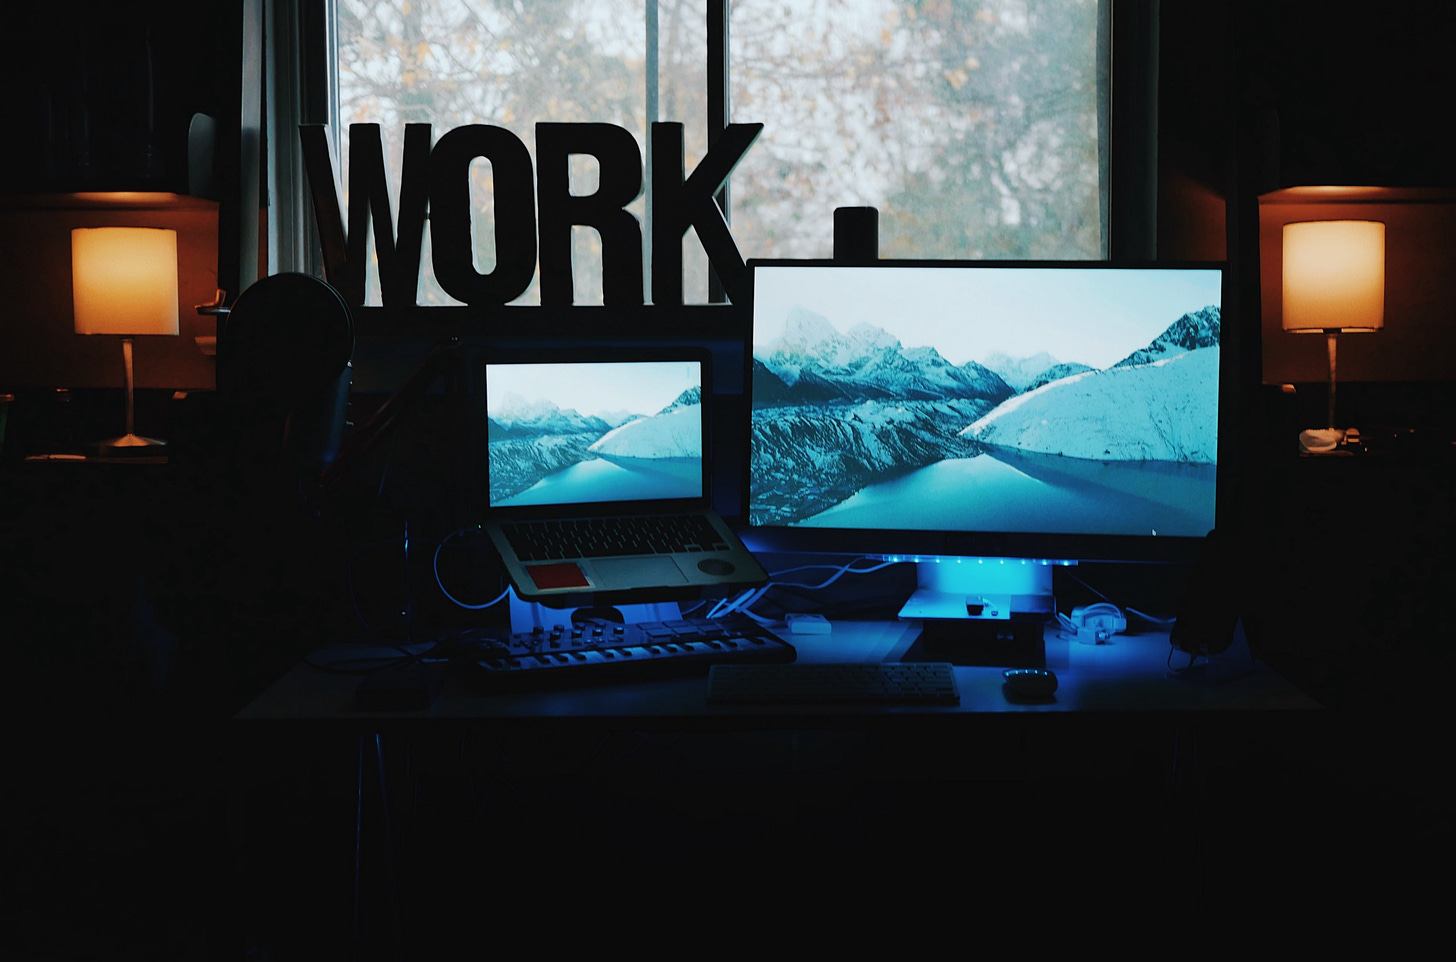 image of a desktop work station with the word work